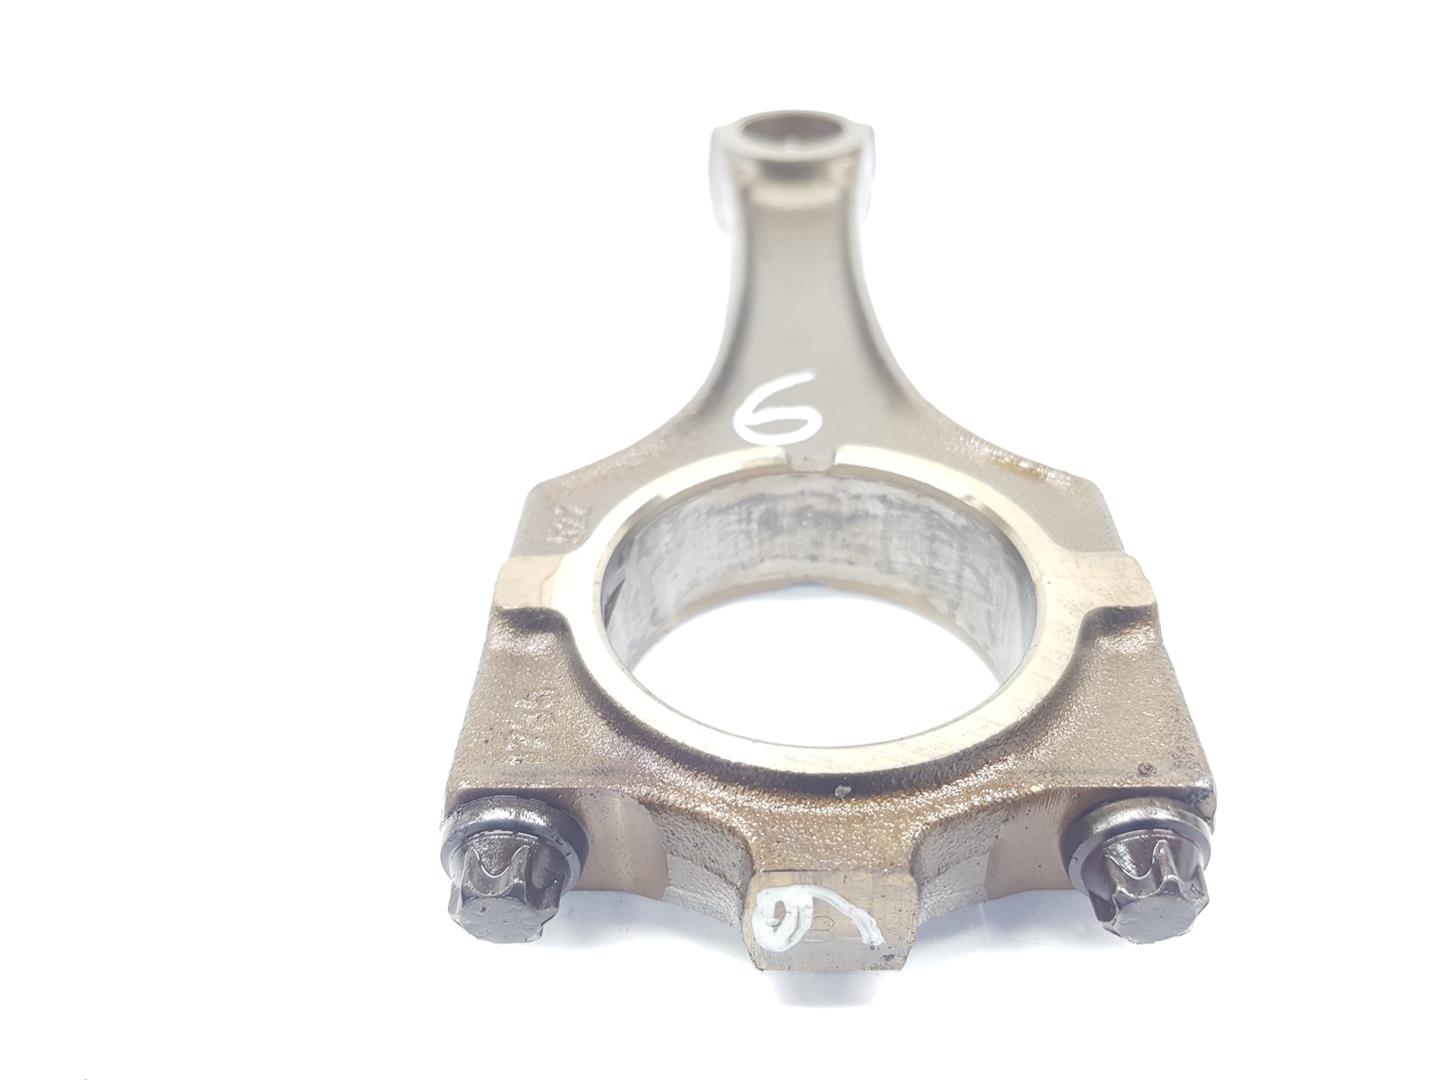 BMW 3 Series E36 (1990-2000) Connecting Rod 11241437212, 11241437212, 1111AA 24228953